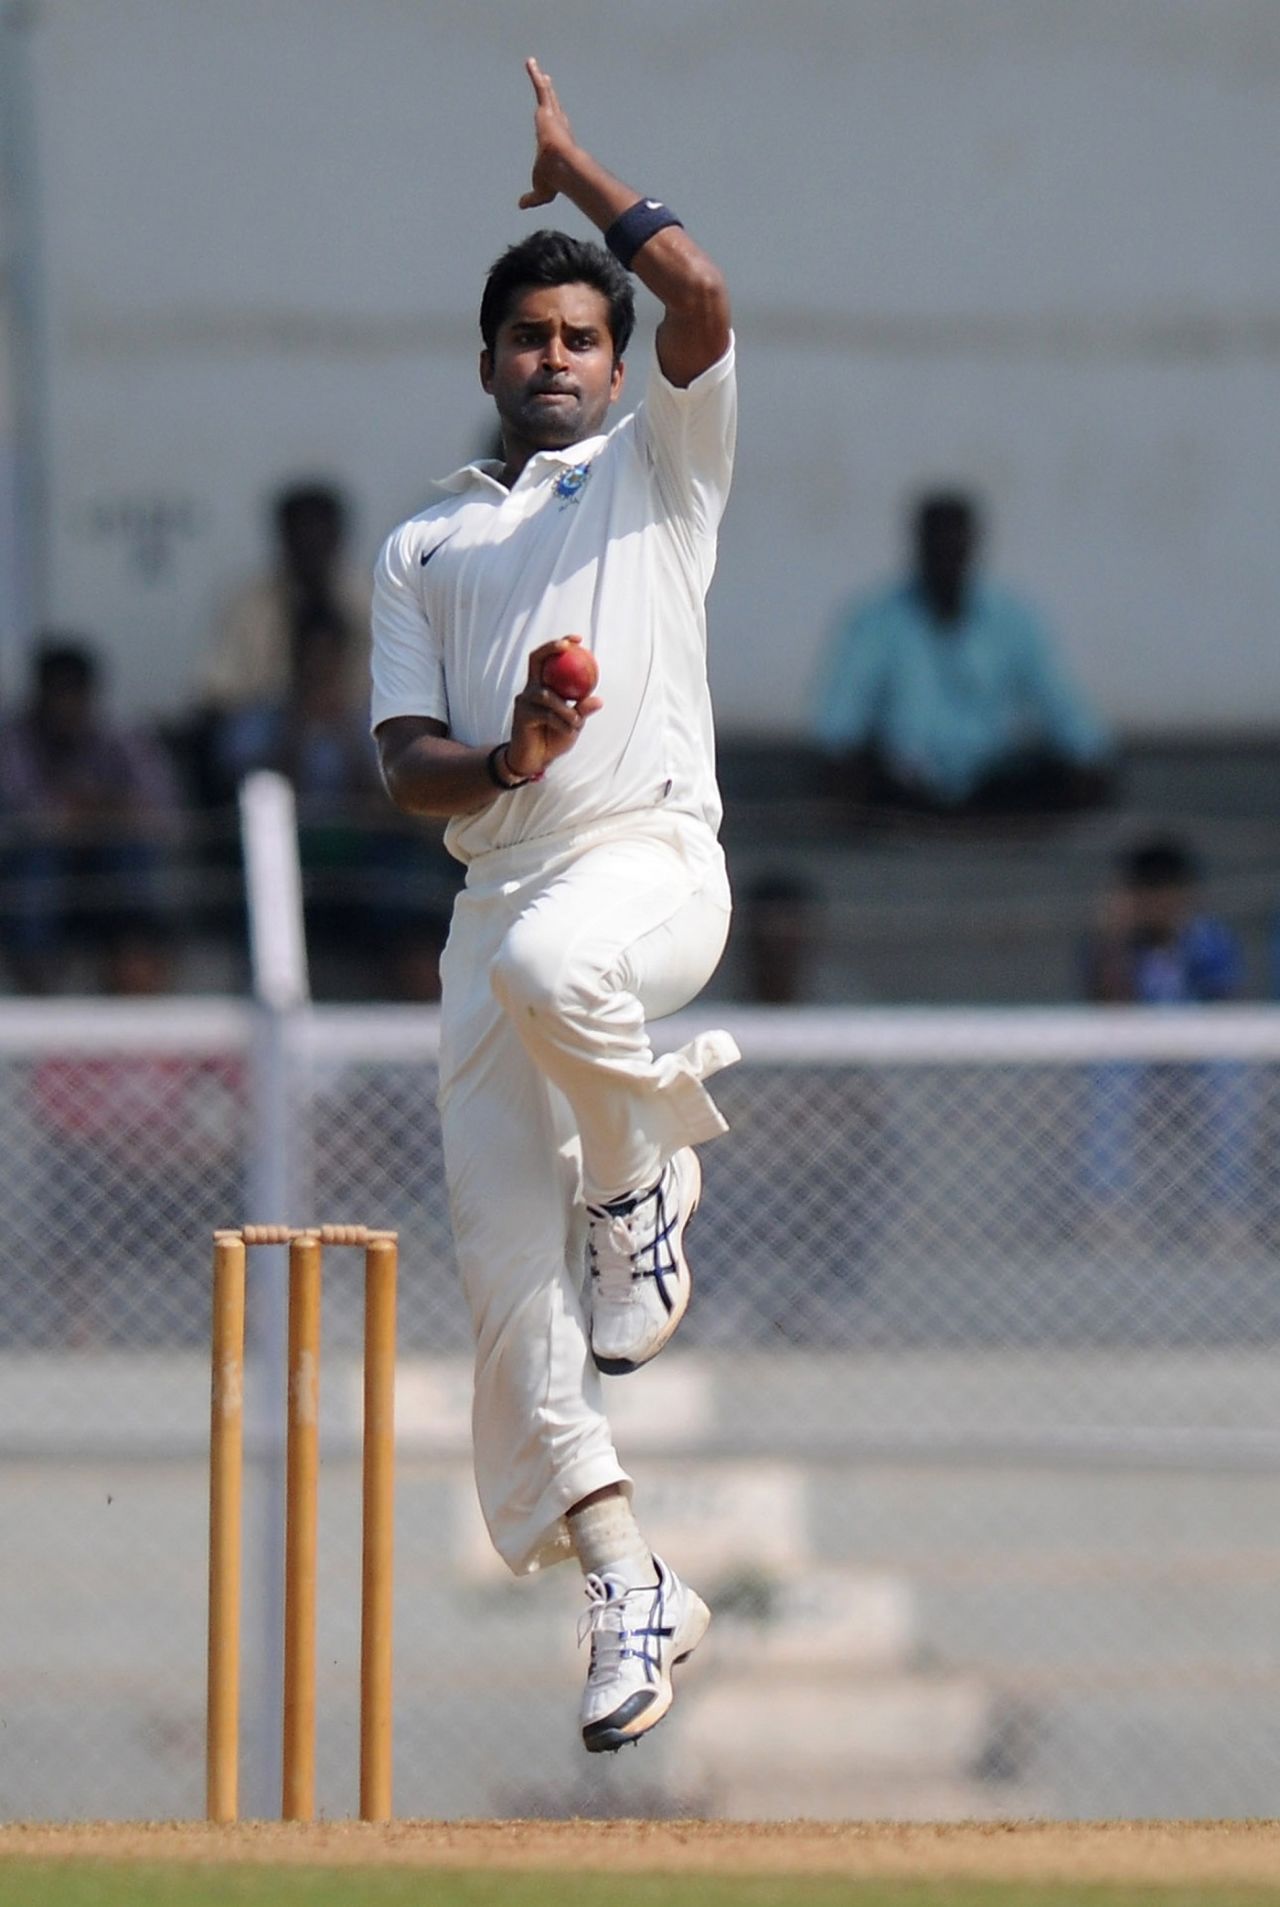 Can Karnataka afford to think about life after Vinay Kumar yet?